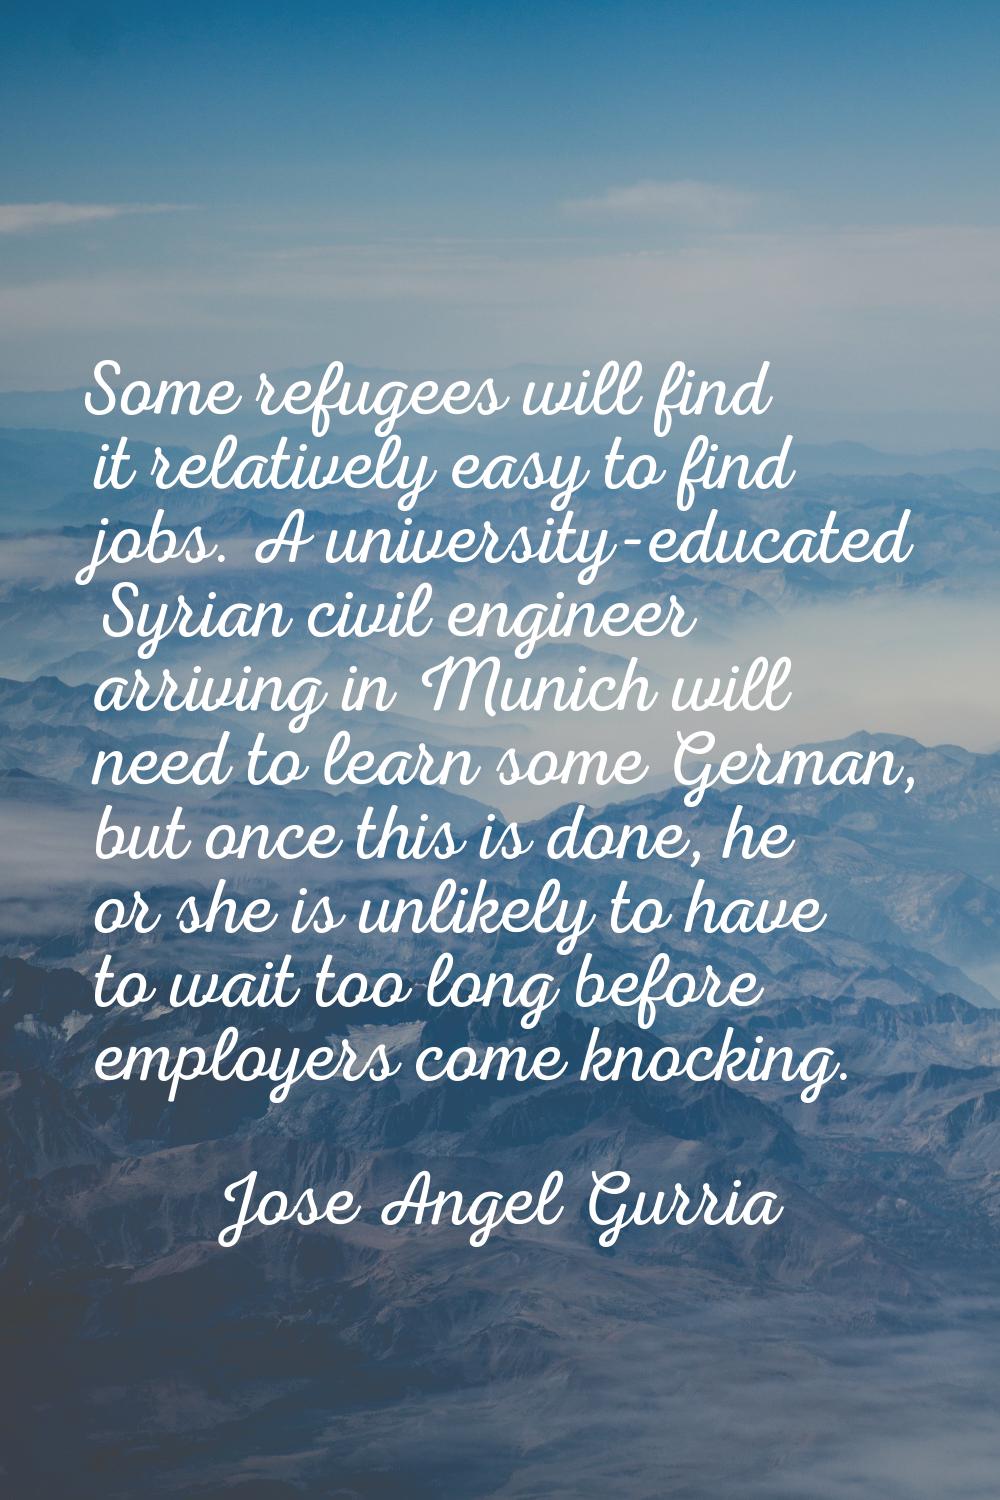 Some refugees will find it relatively easy to find jobs. A university-educated Syrian civil enginee